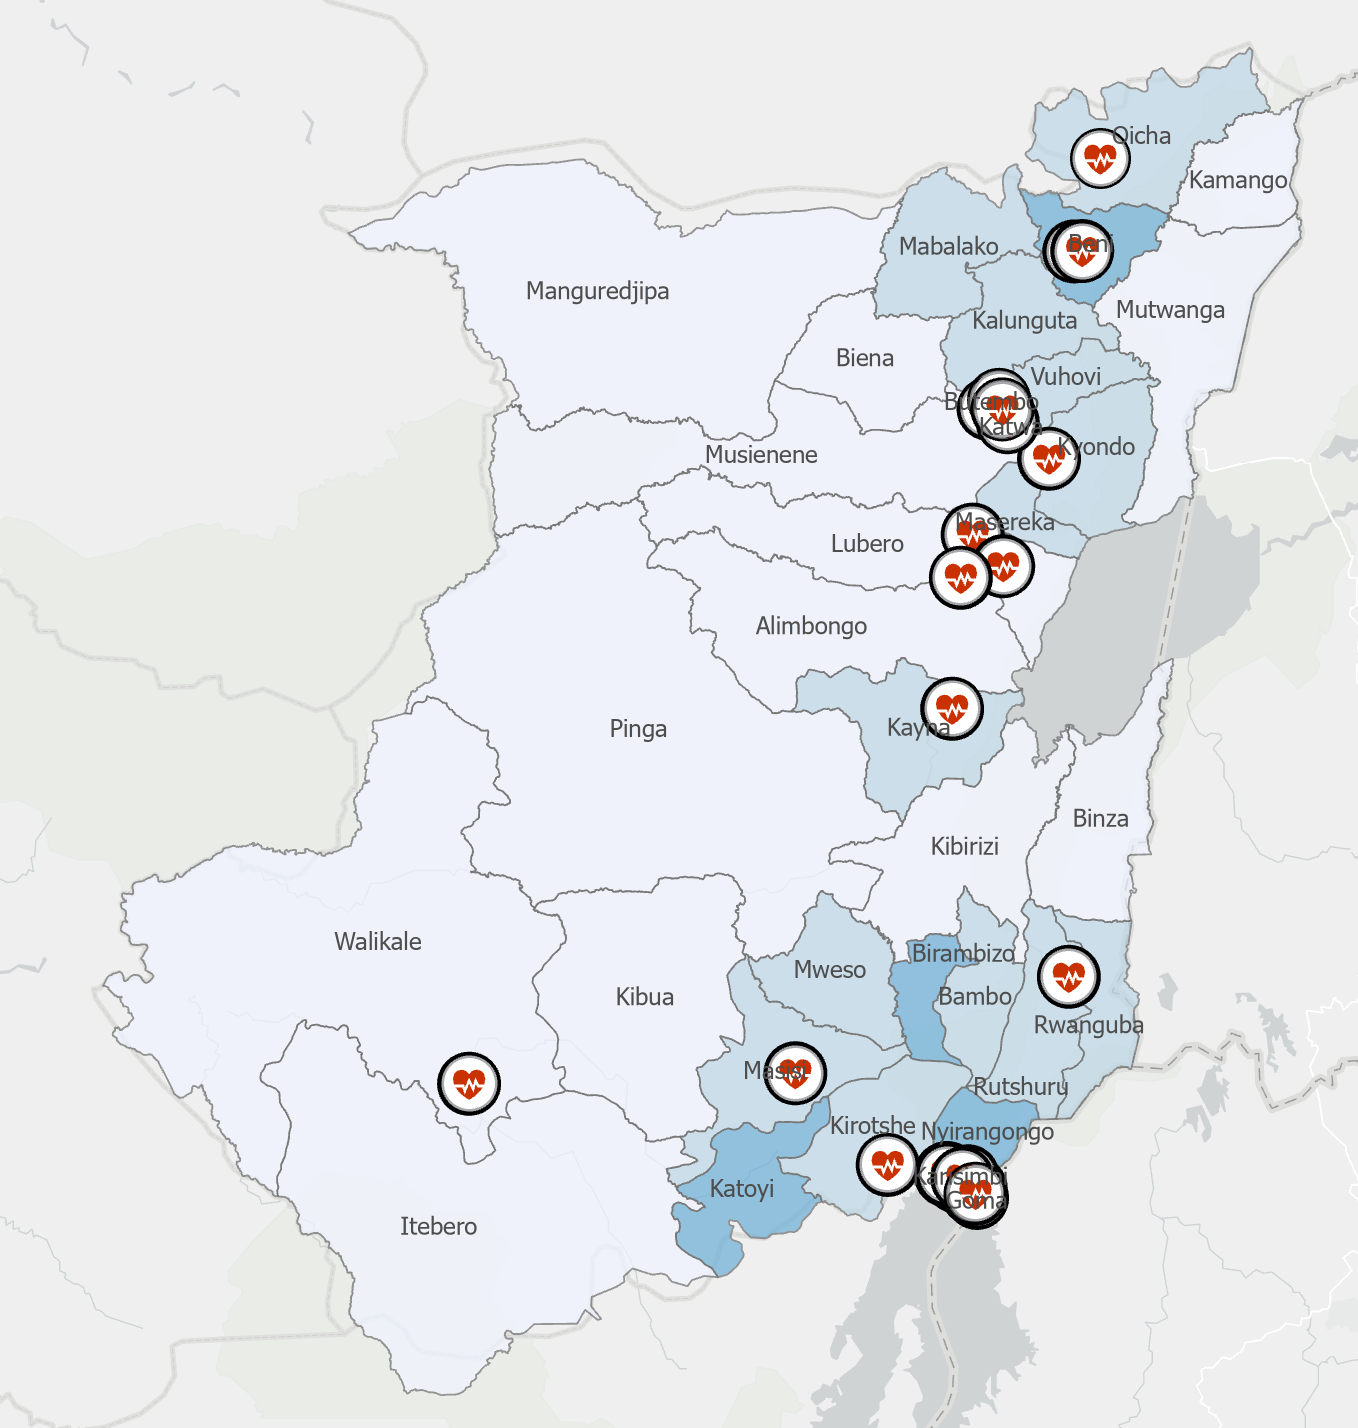 A map of 25 health facilities instrumented with sensors in the North Kivu province of the DRC. (credit: Samuel Miles)